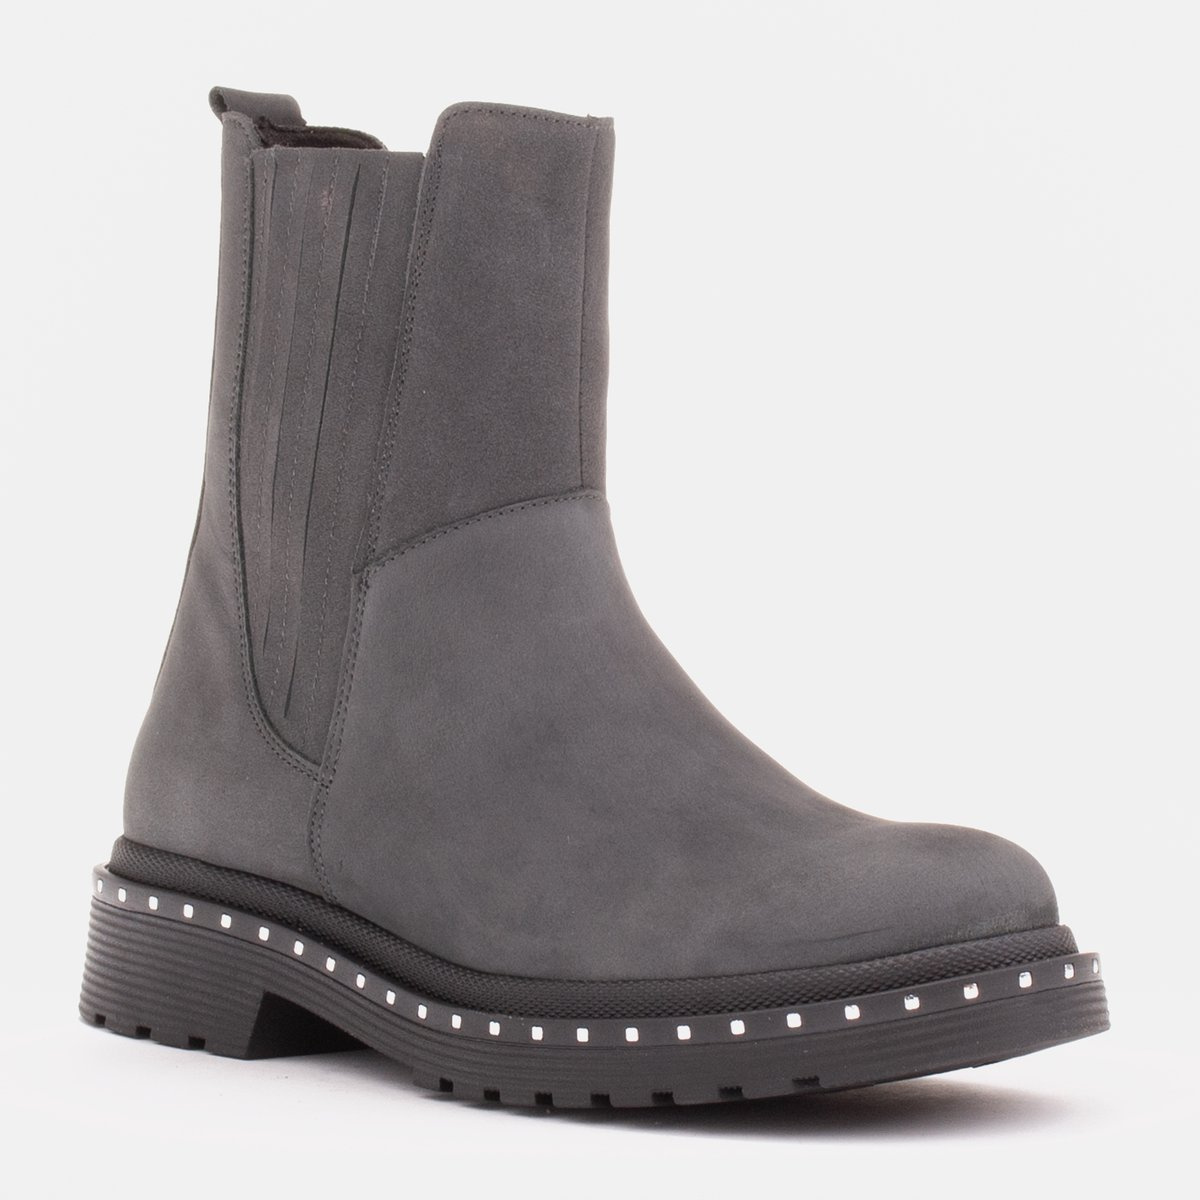 Costanza boots with silver studs